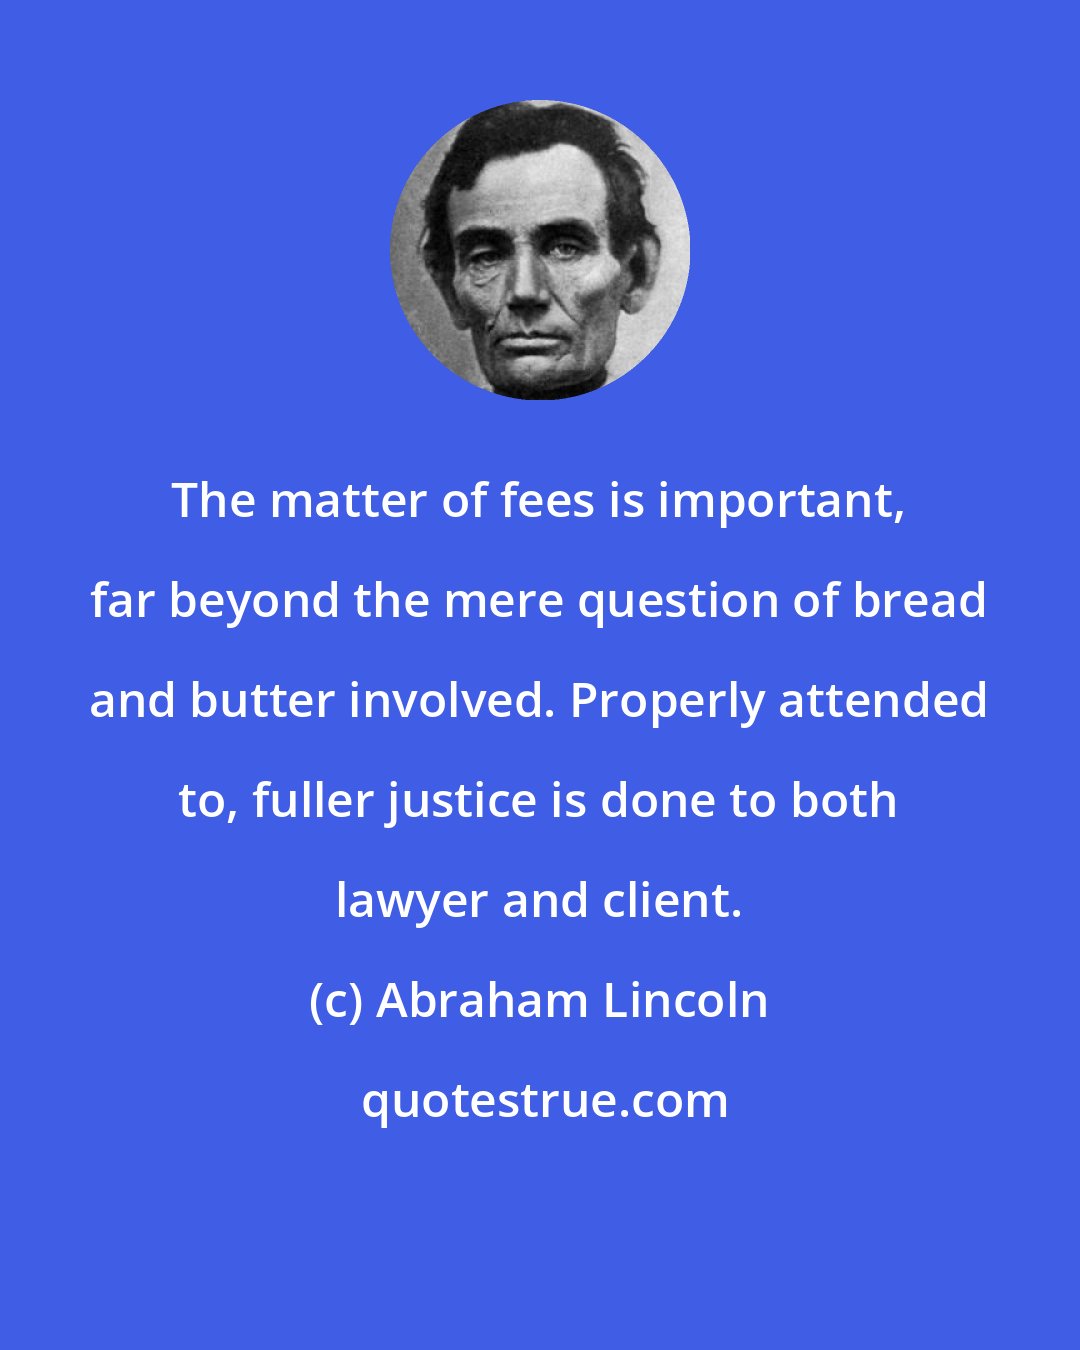 Abraham Lincoln: The matter of fees is important, far beyond the mere question of bread and butter involved. Properly attended to, fuller justice is done to both lawyer and client.